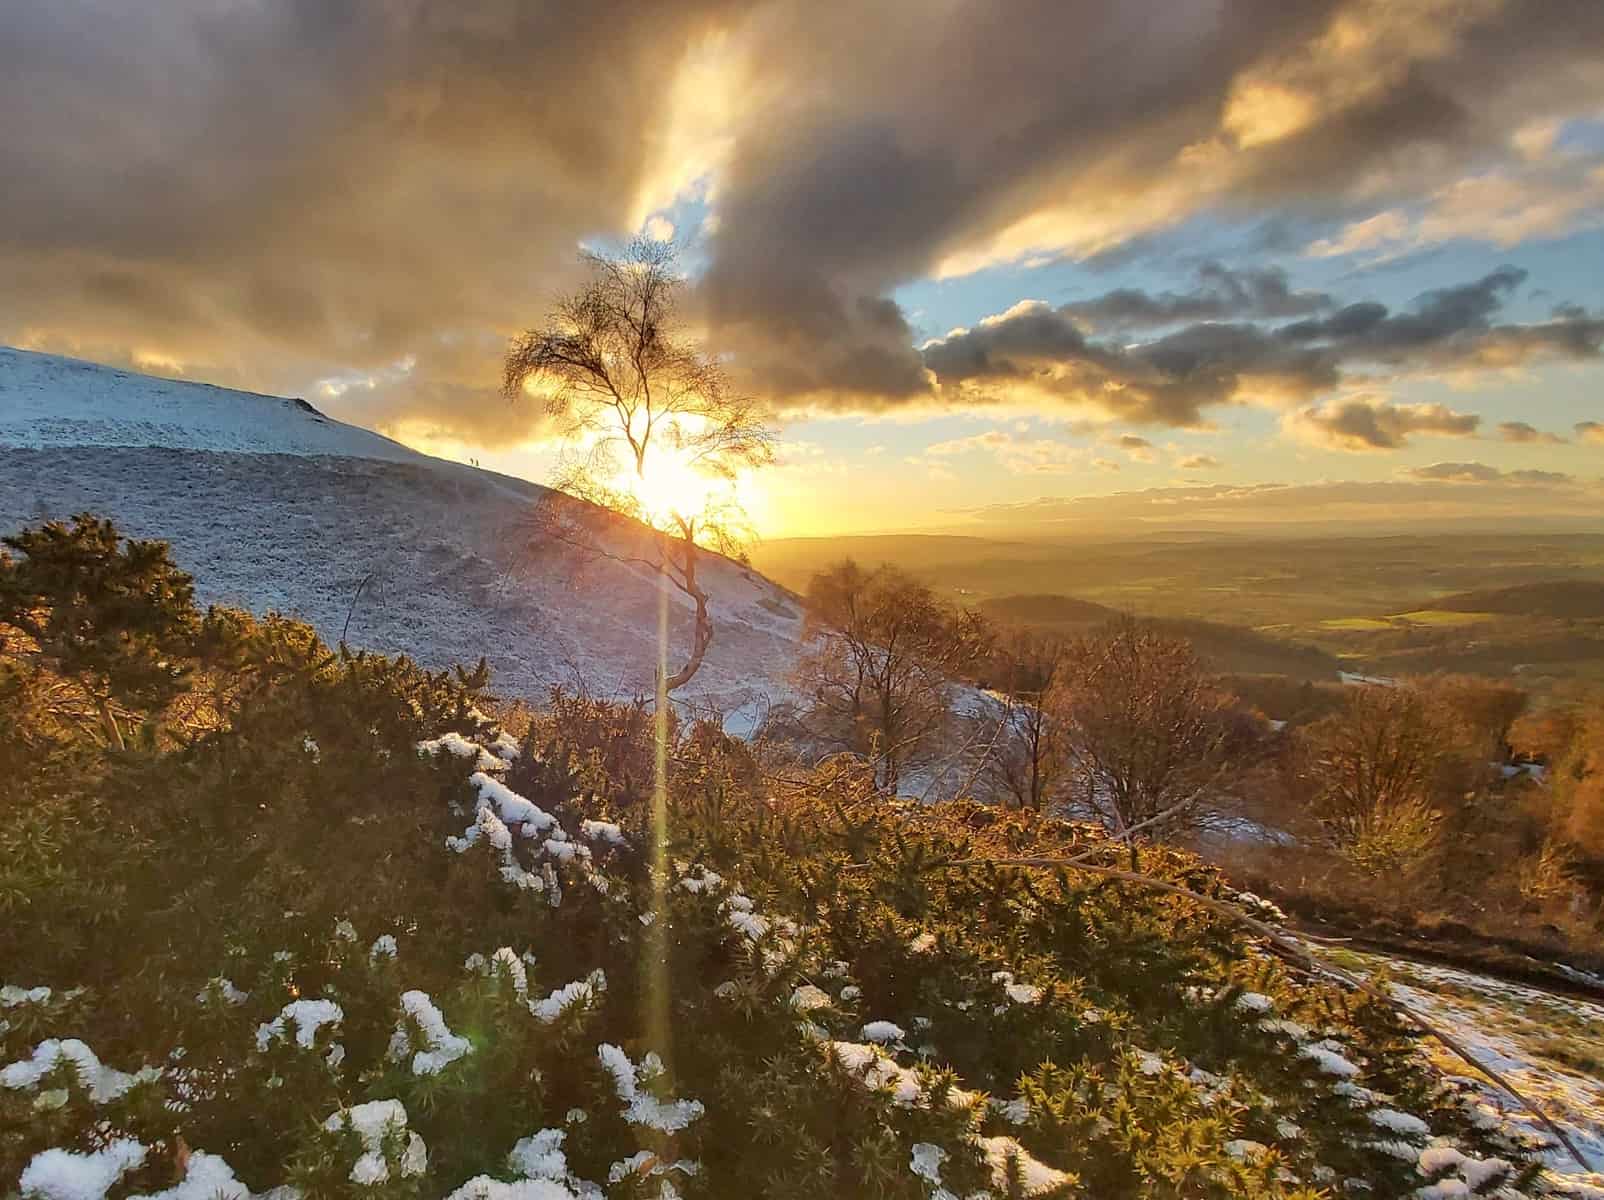 Snow covered bushes in the foreground with a winter tree in the centre and snowy hills in the background at sunset